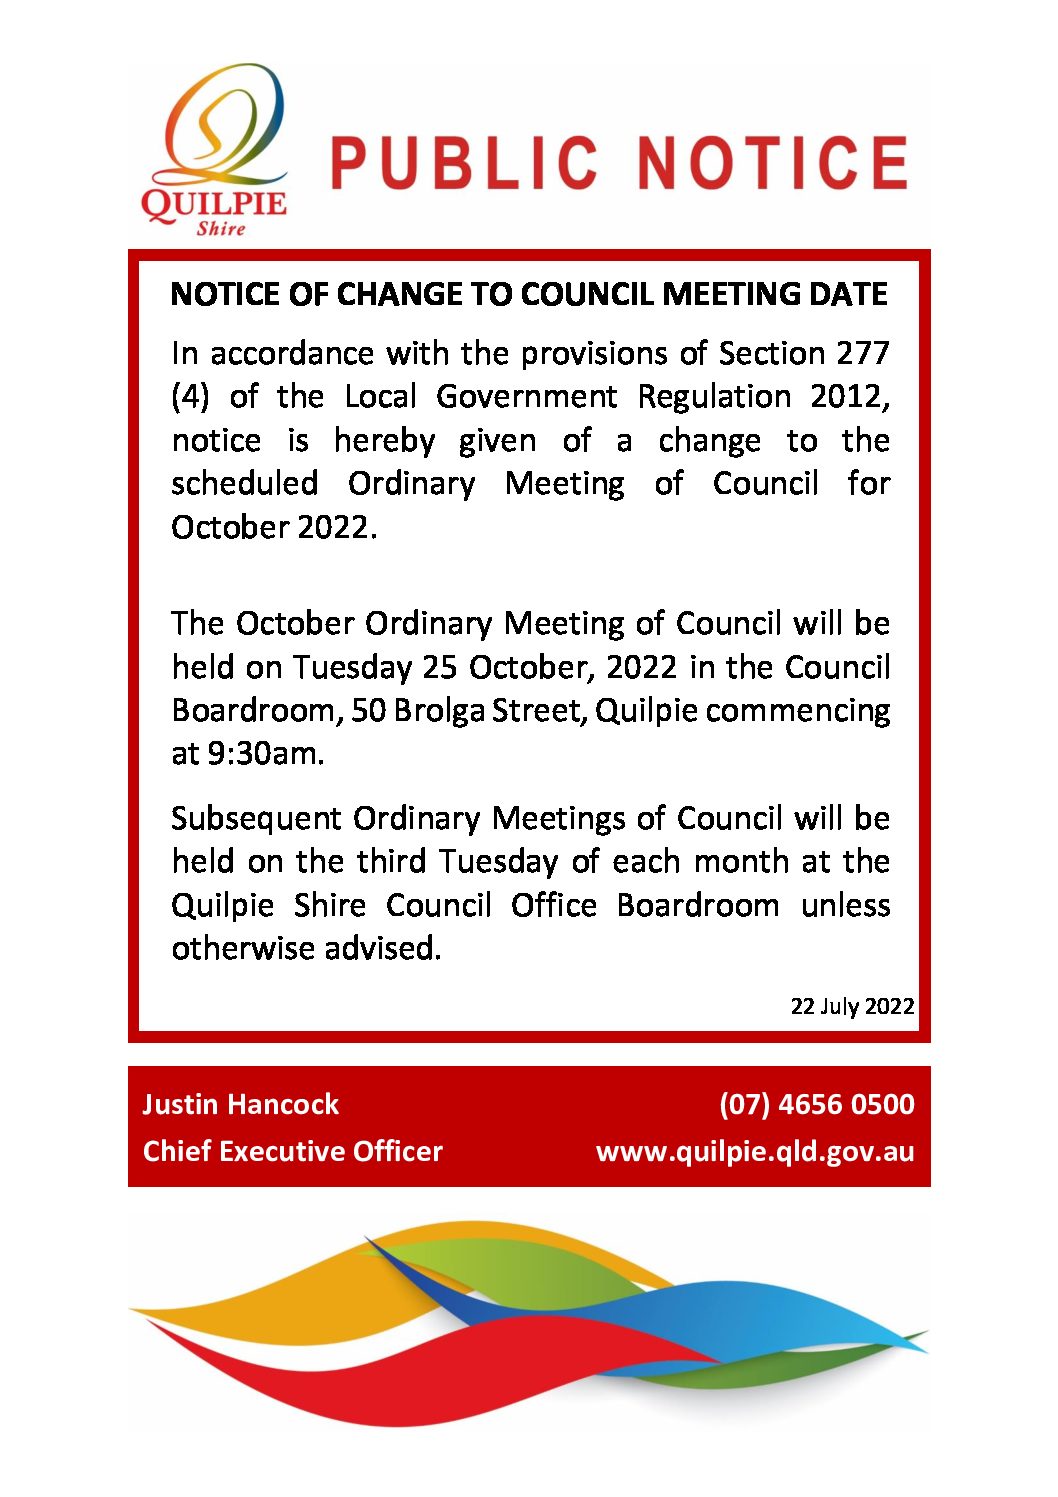 Change Council Meeting Date – October